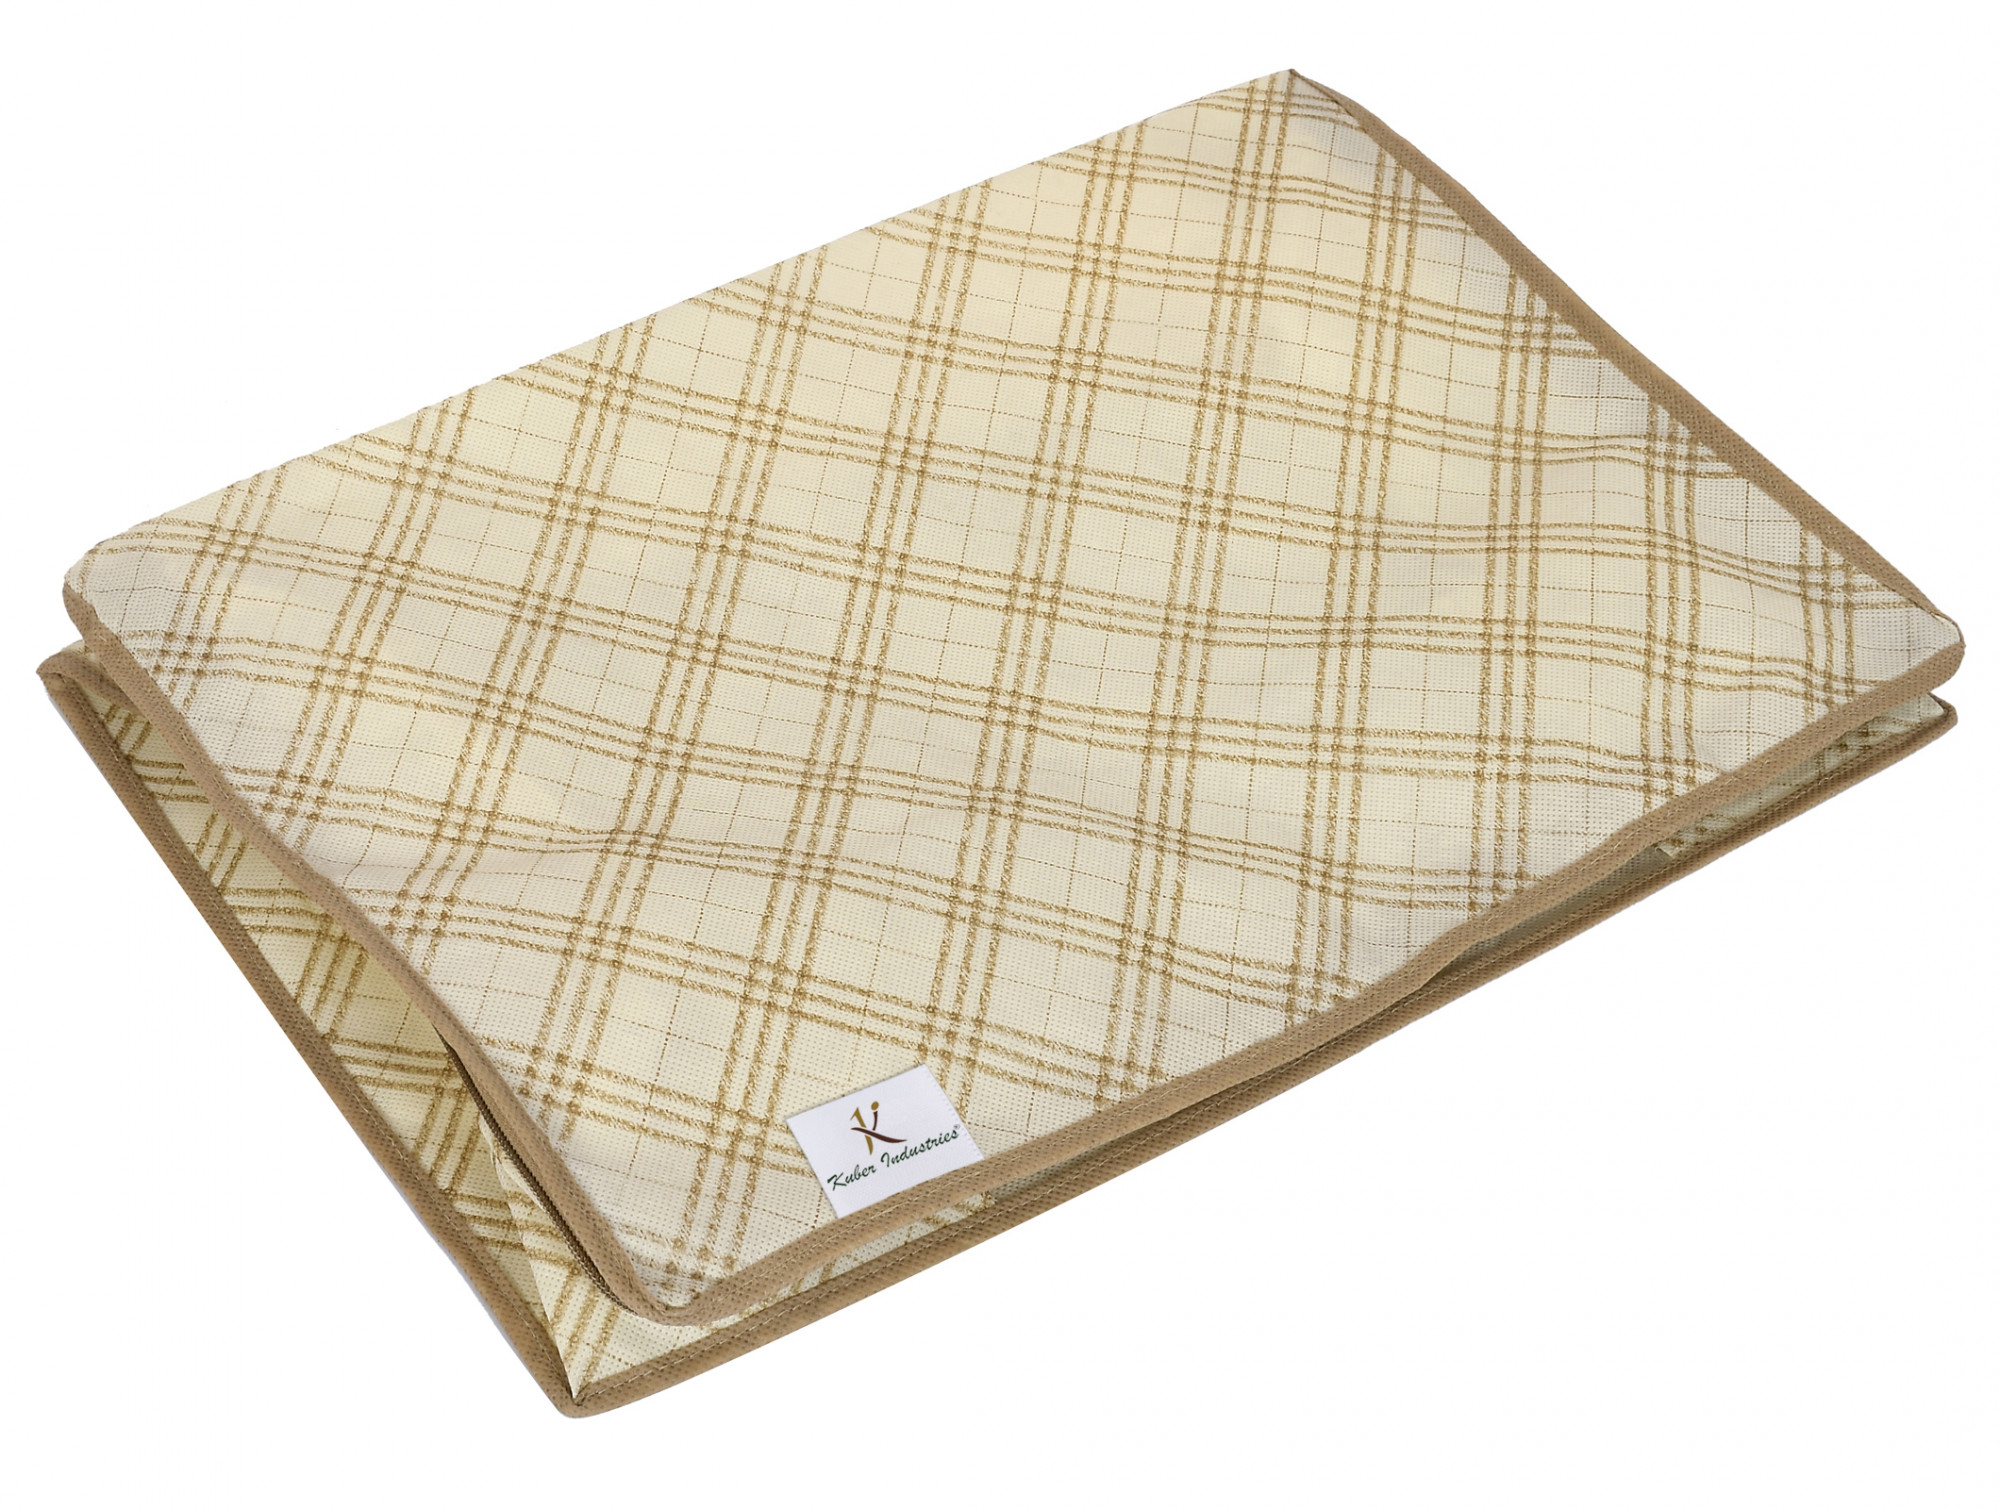 Kuber Industries Metalic Checkered Print Non Woven Saree Cover And Underbed Storage Bag, Storage Organiser, Blanket Cover (Ivory)-34_S_KUBMART16667